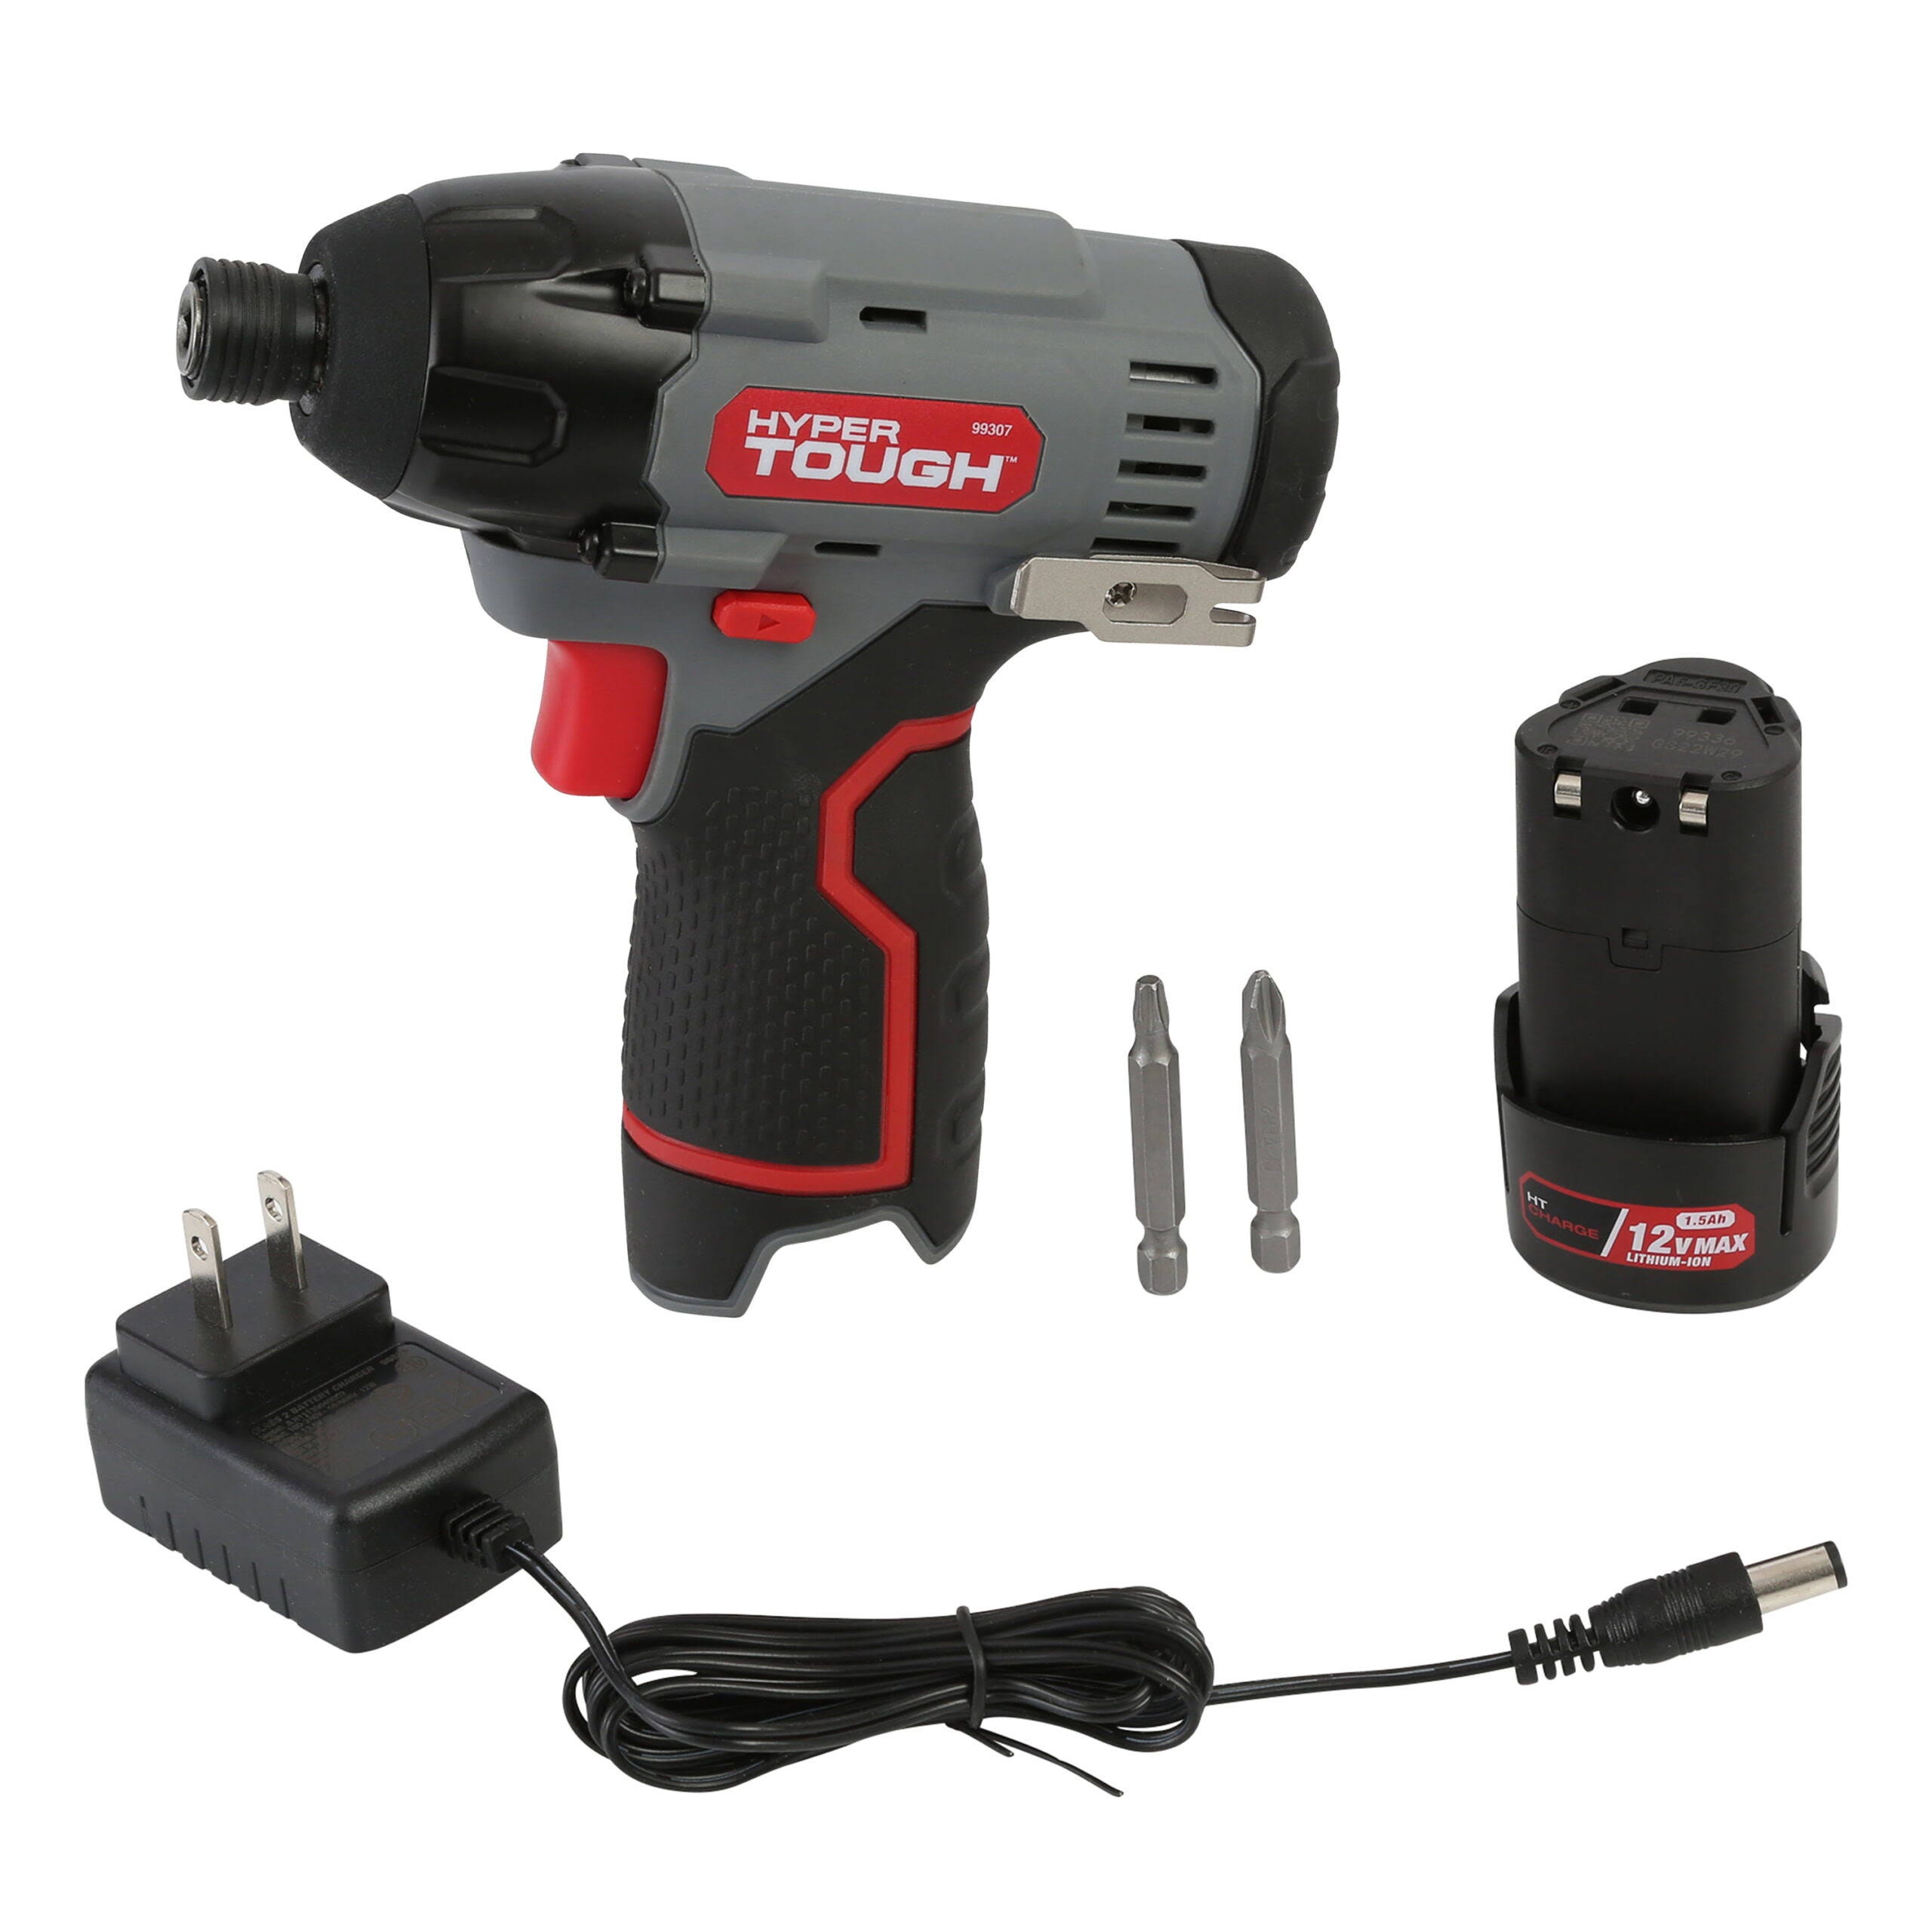 Hyper Tough 12V Max Lithium-Ion Cordless Impact Driver: Lightweight, Compact, and Easy to Use | Image